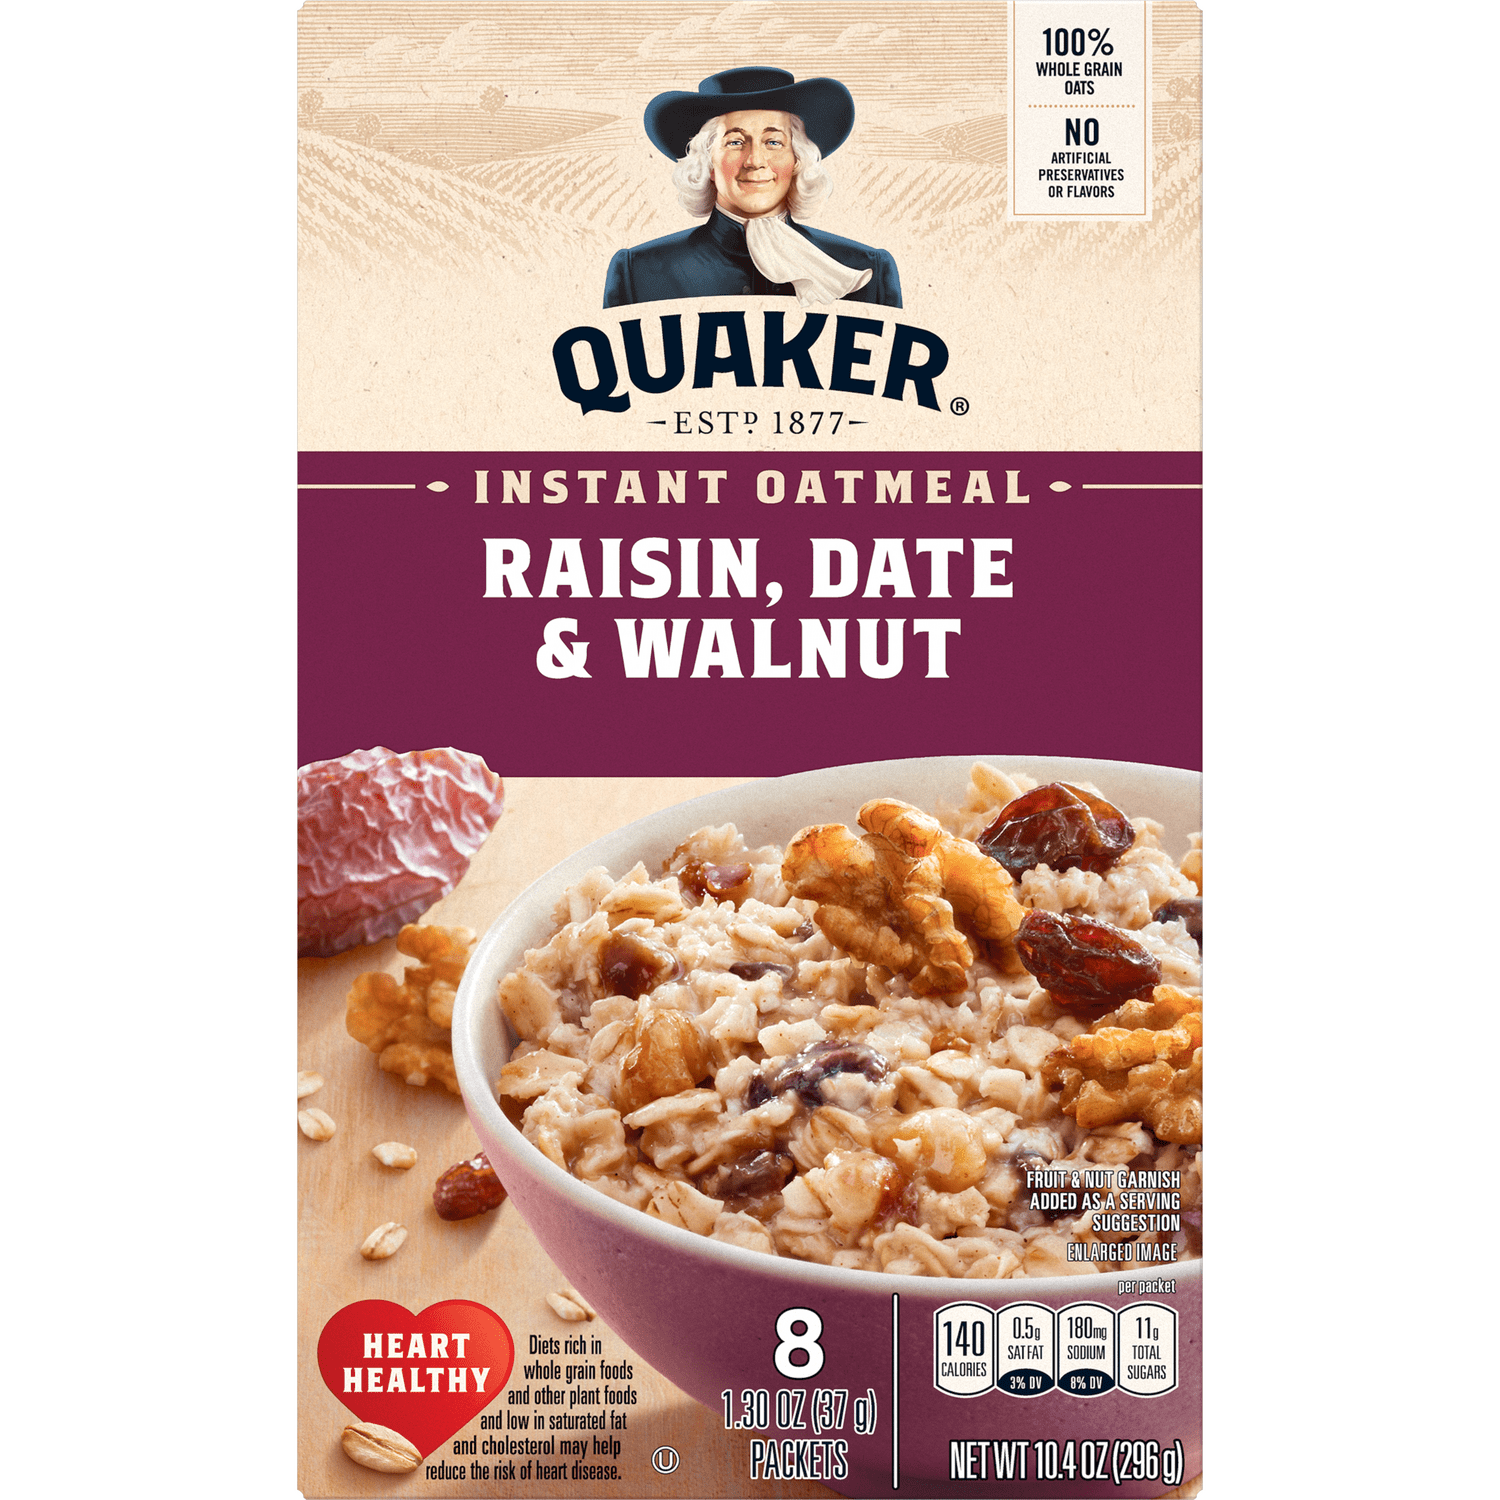 Quaker® Instant Oatmeal - Raisin, Date and Walnut package (back view)